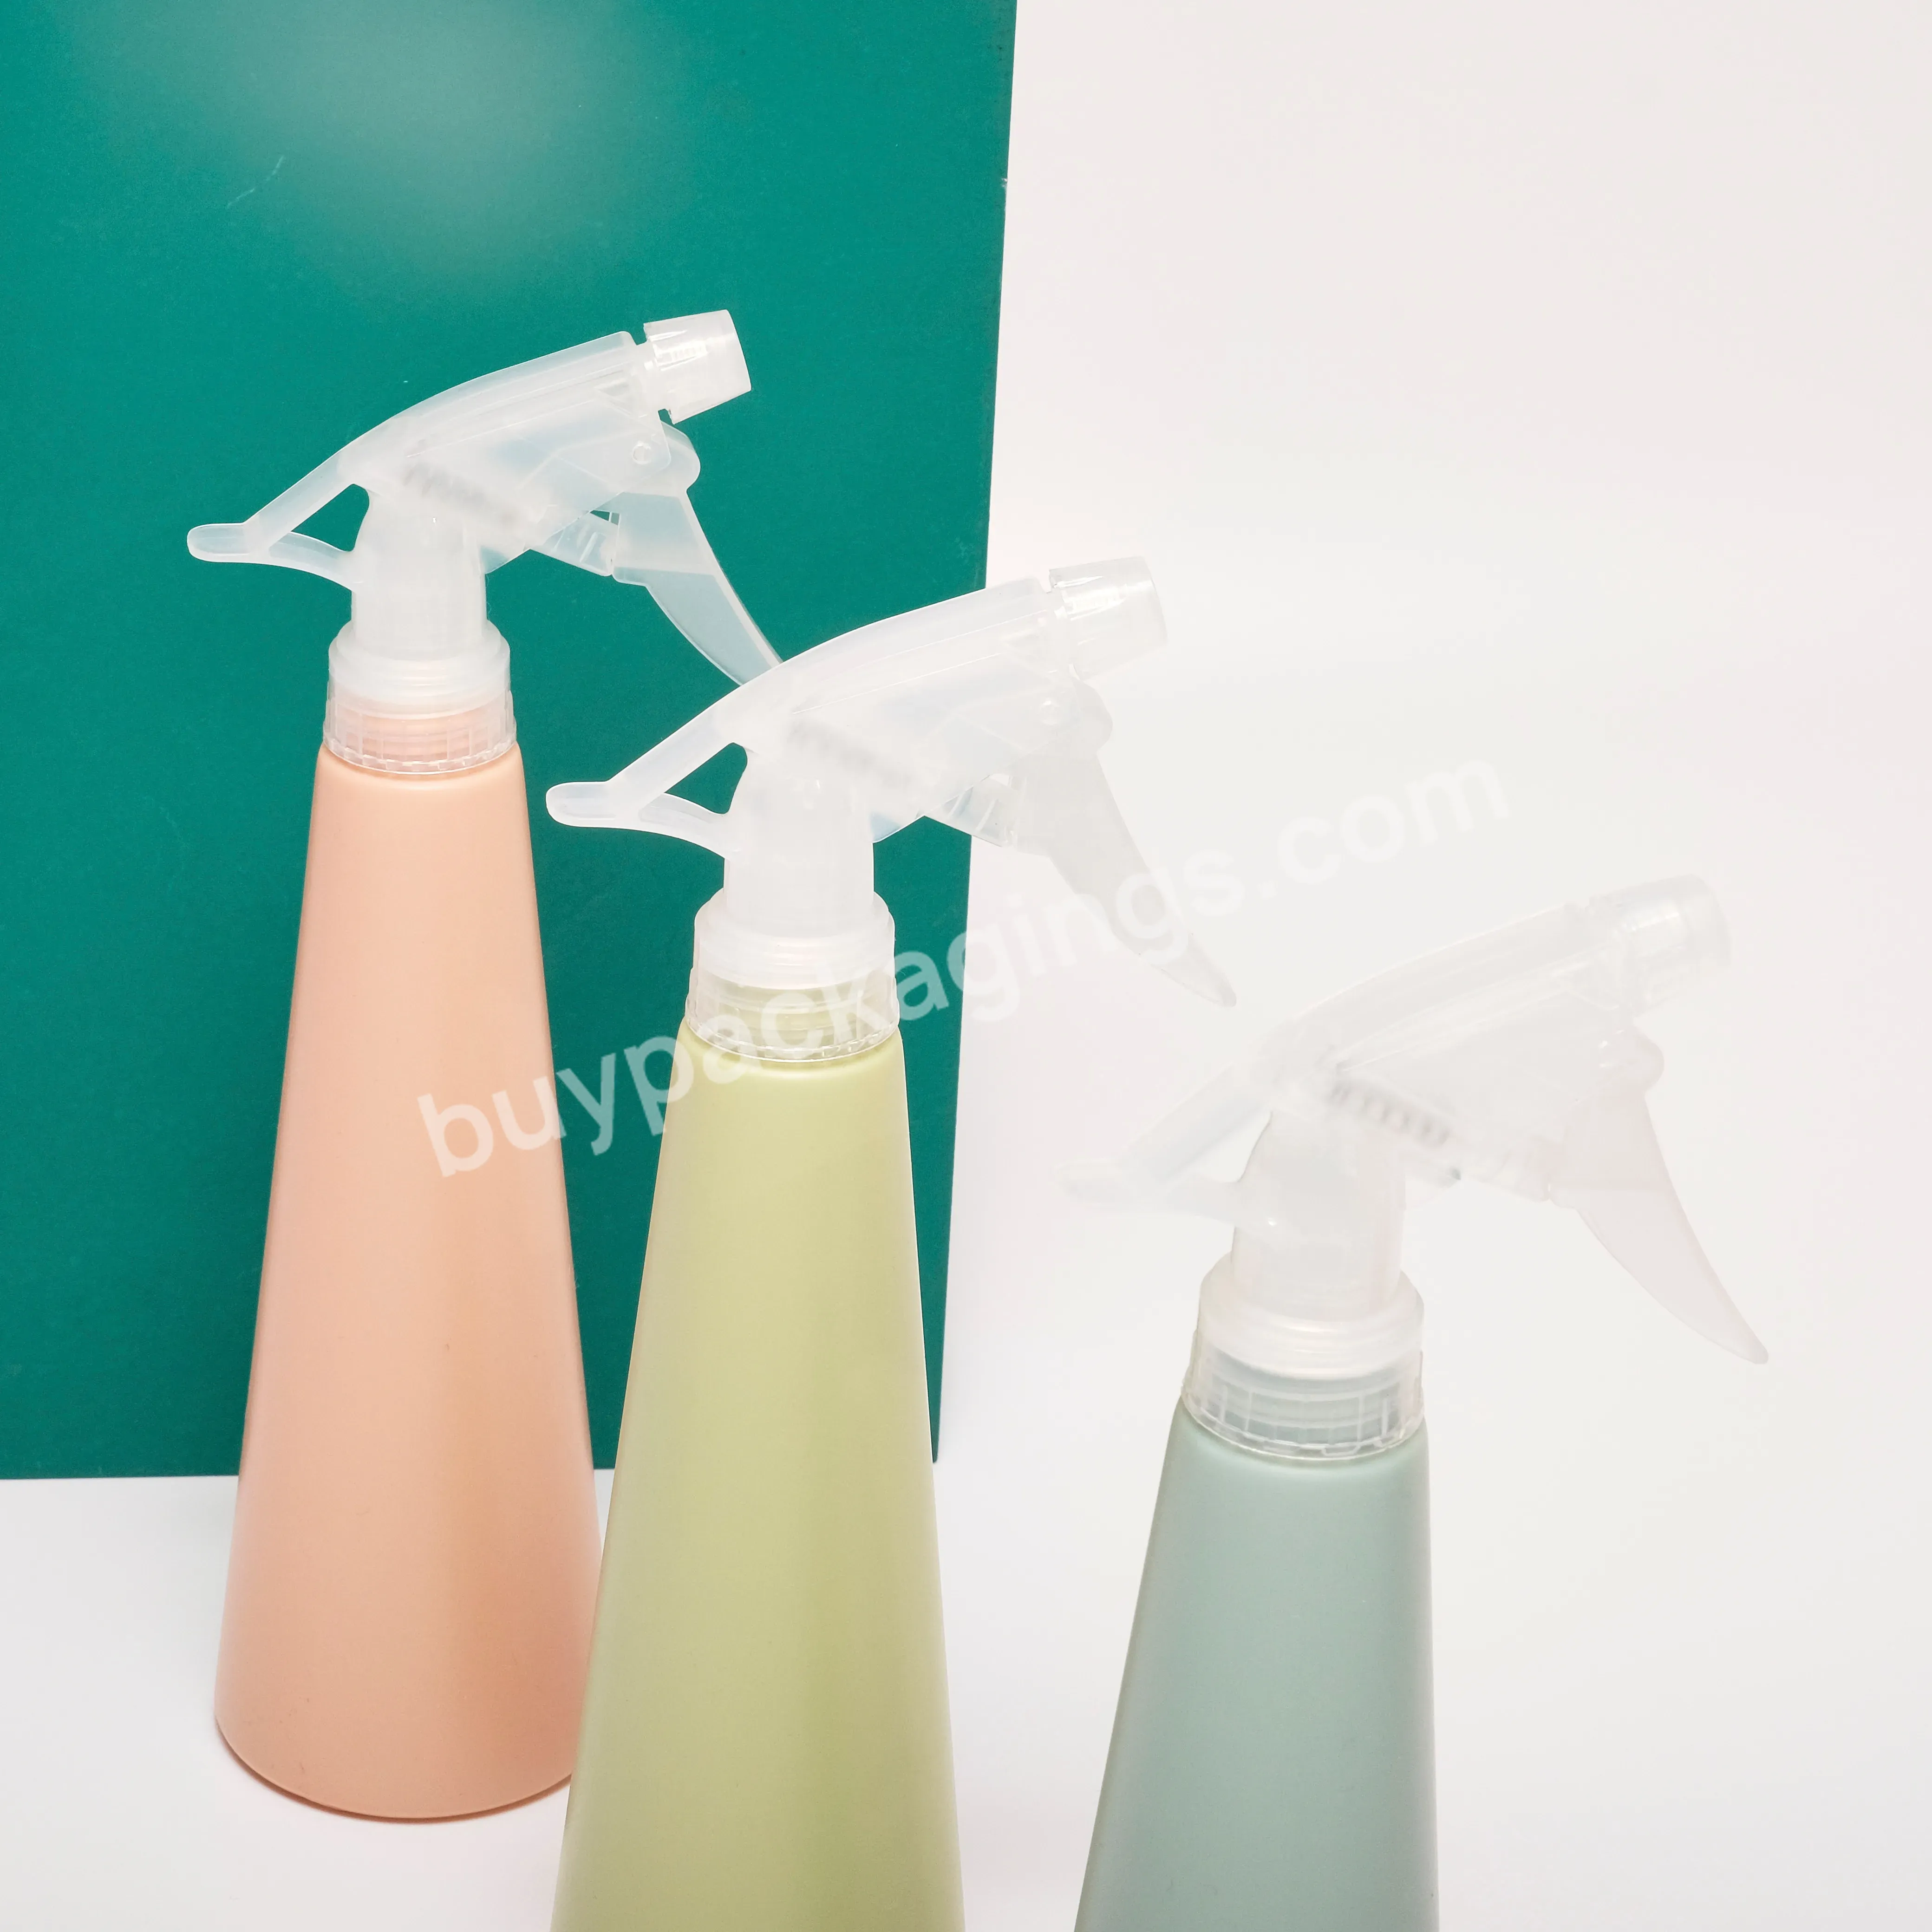 Portable Cute Gardening Tools Plant Spray Bottle Watering Can Plant Flower Watering Can Spray Bottle Sprayer - Buy Plastic Trigger Spray Bottle,Sprayer And Watering Can,Multi-function Gardening Home Watering Can.